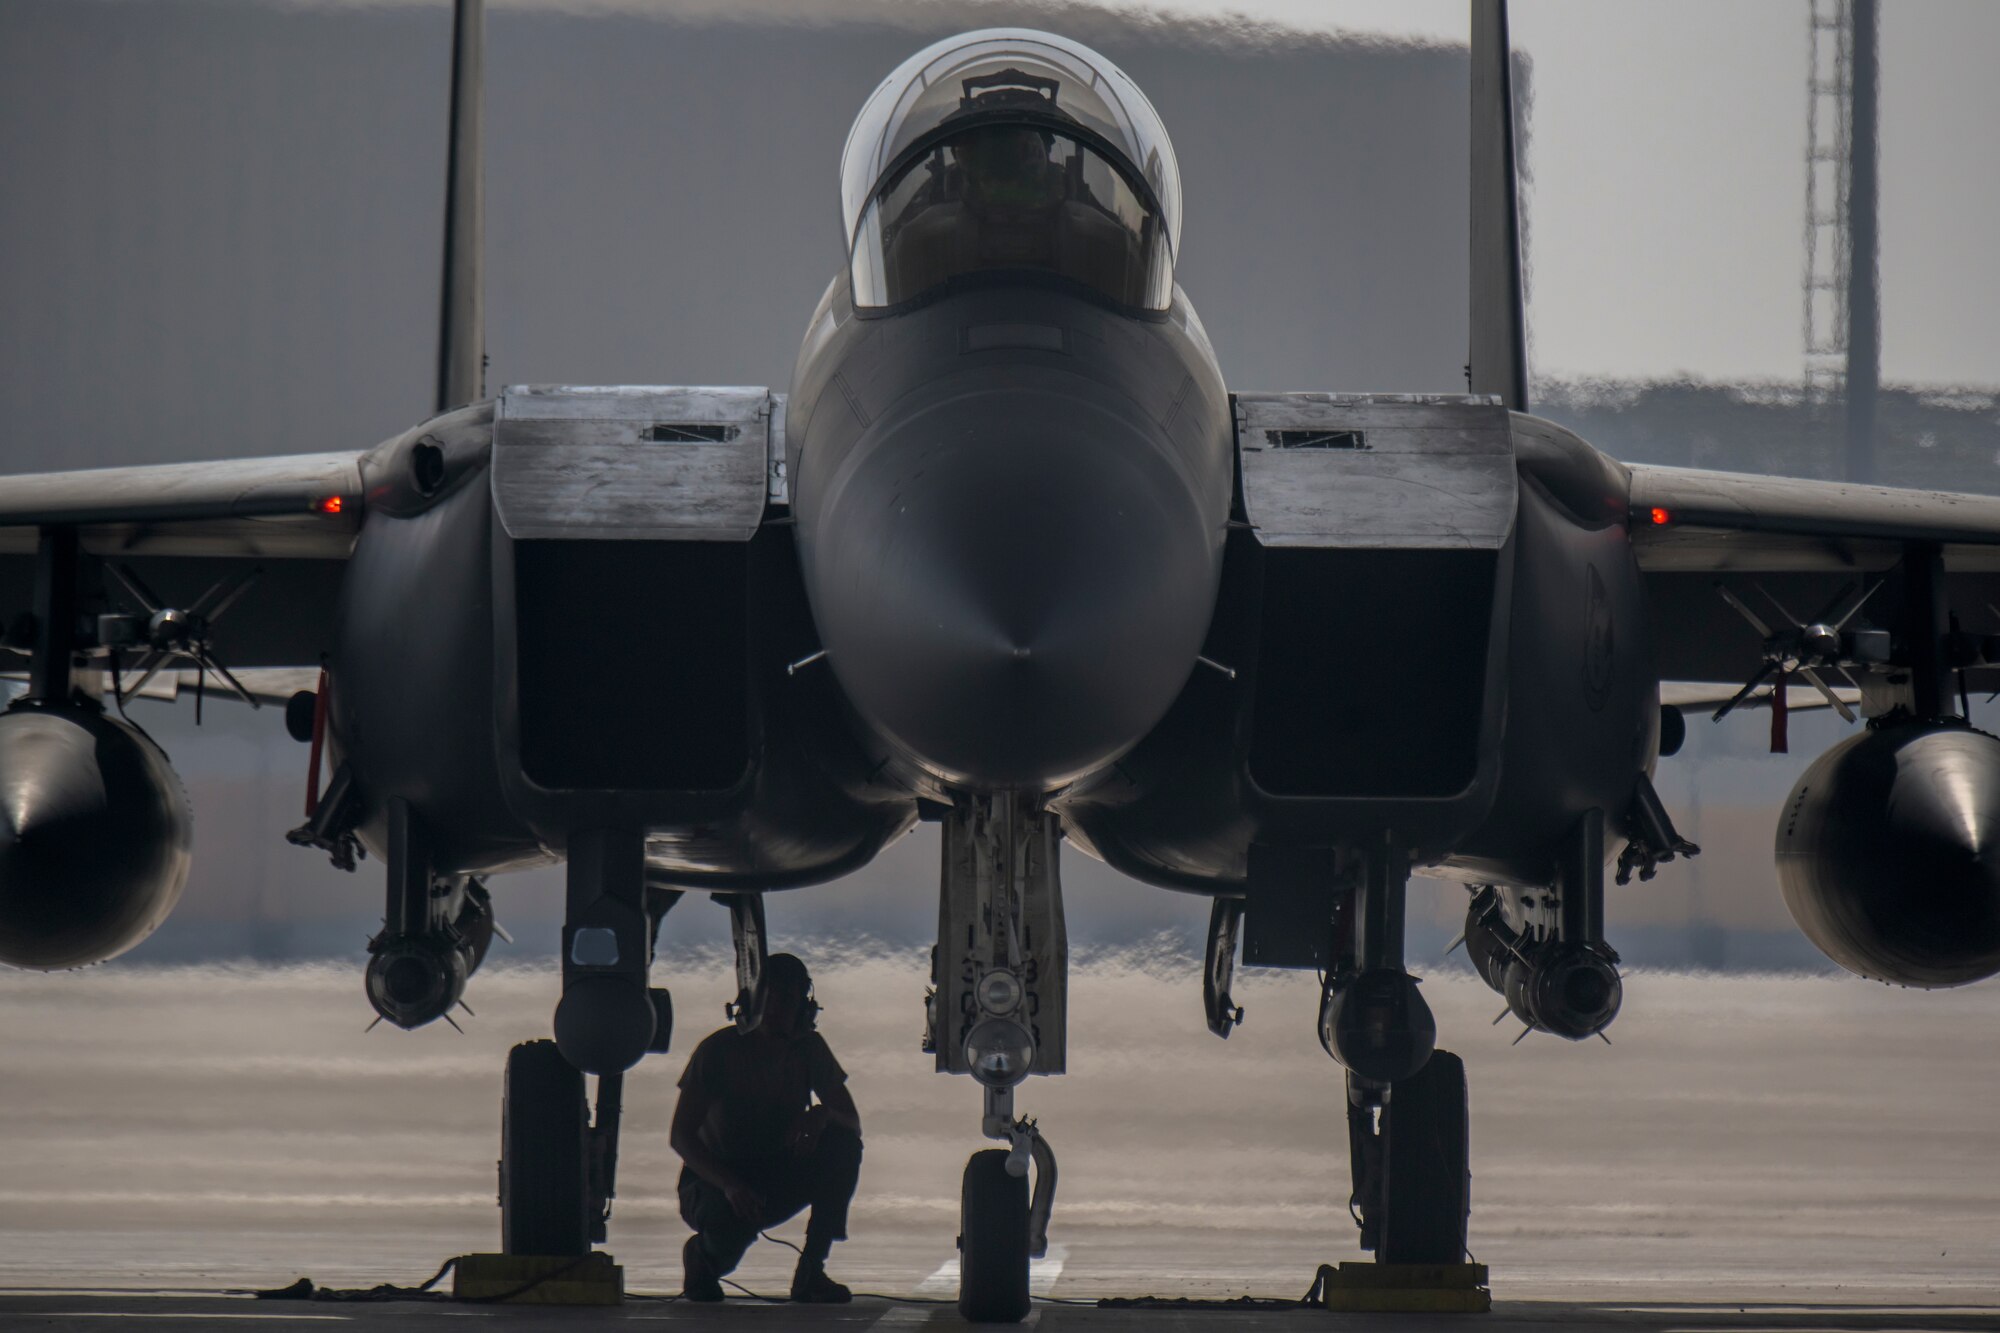 U.S. Air Force Capt. Miranda Bray, 494th Expeditionary Fighter Squadron, F-15E Strike Eagle fighter pilot,  deployed to Al Dhafra Air Base as part of an agile combat employment, a form of operations that increases the pace and frequency of missions while maximizing efficiencies.